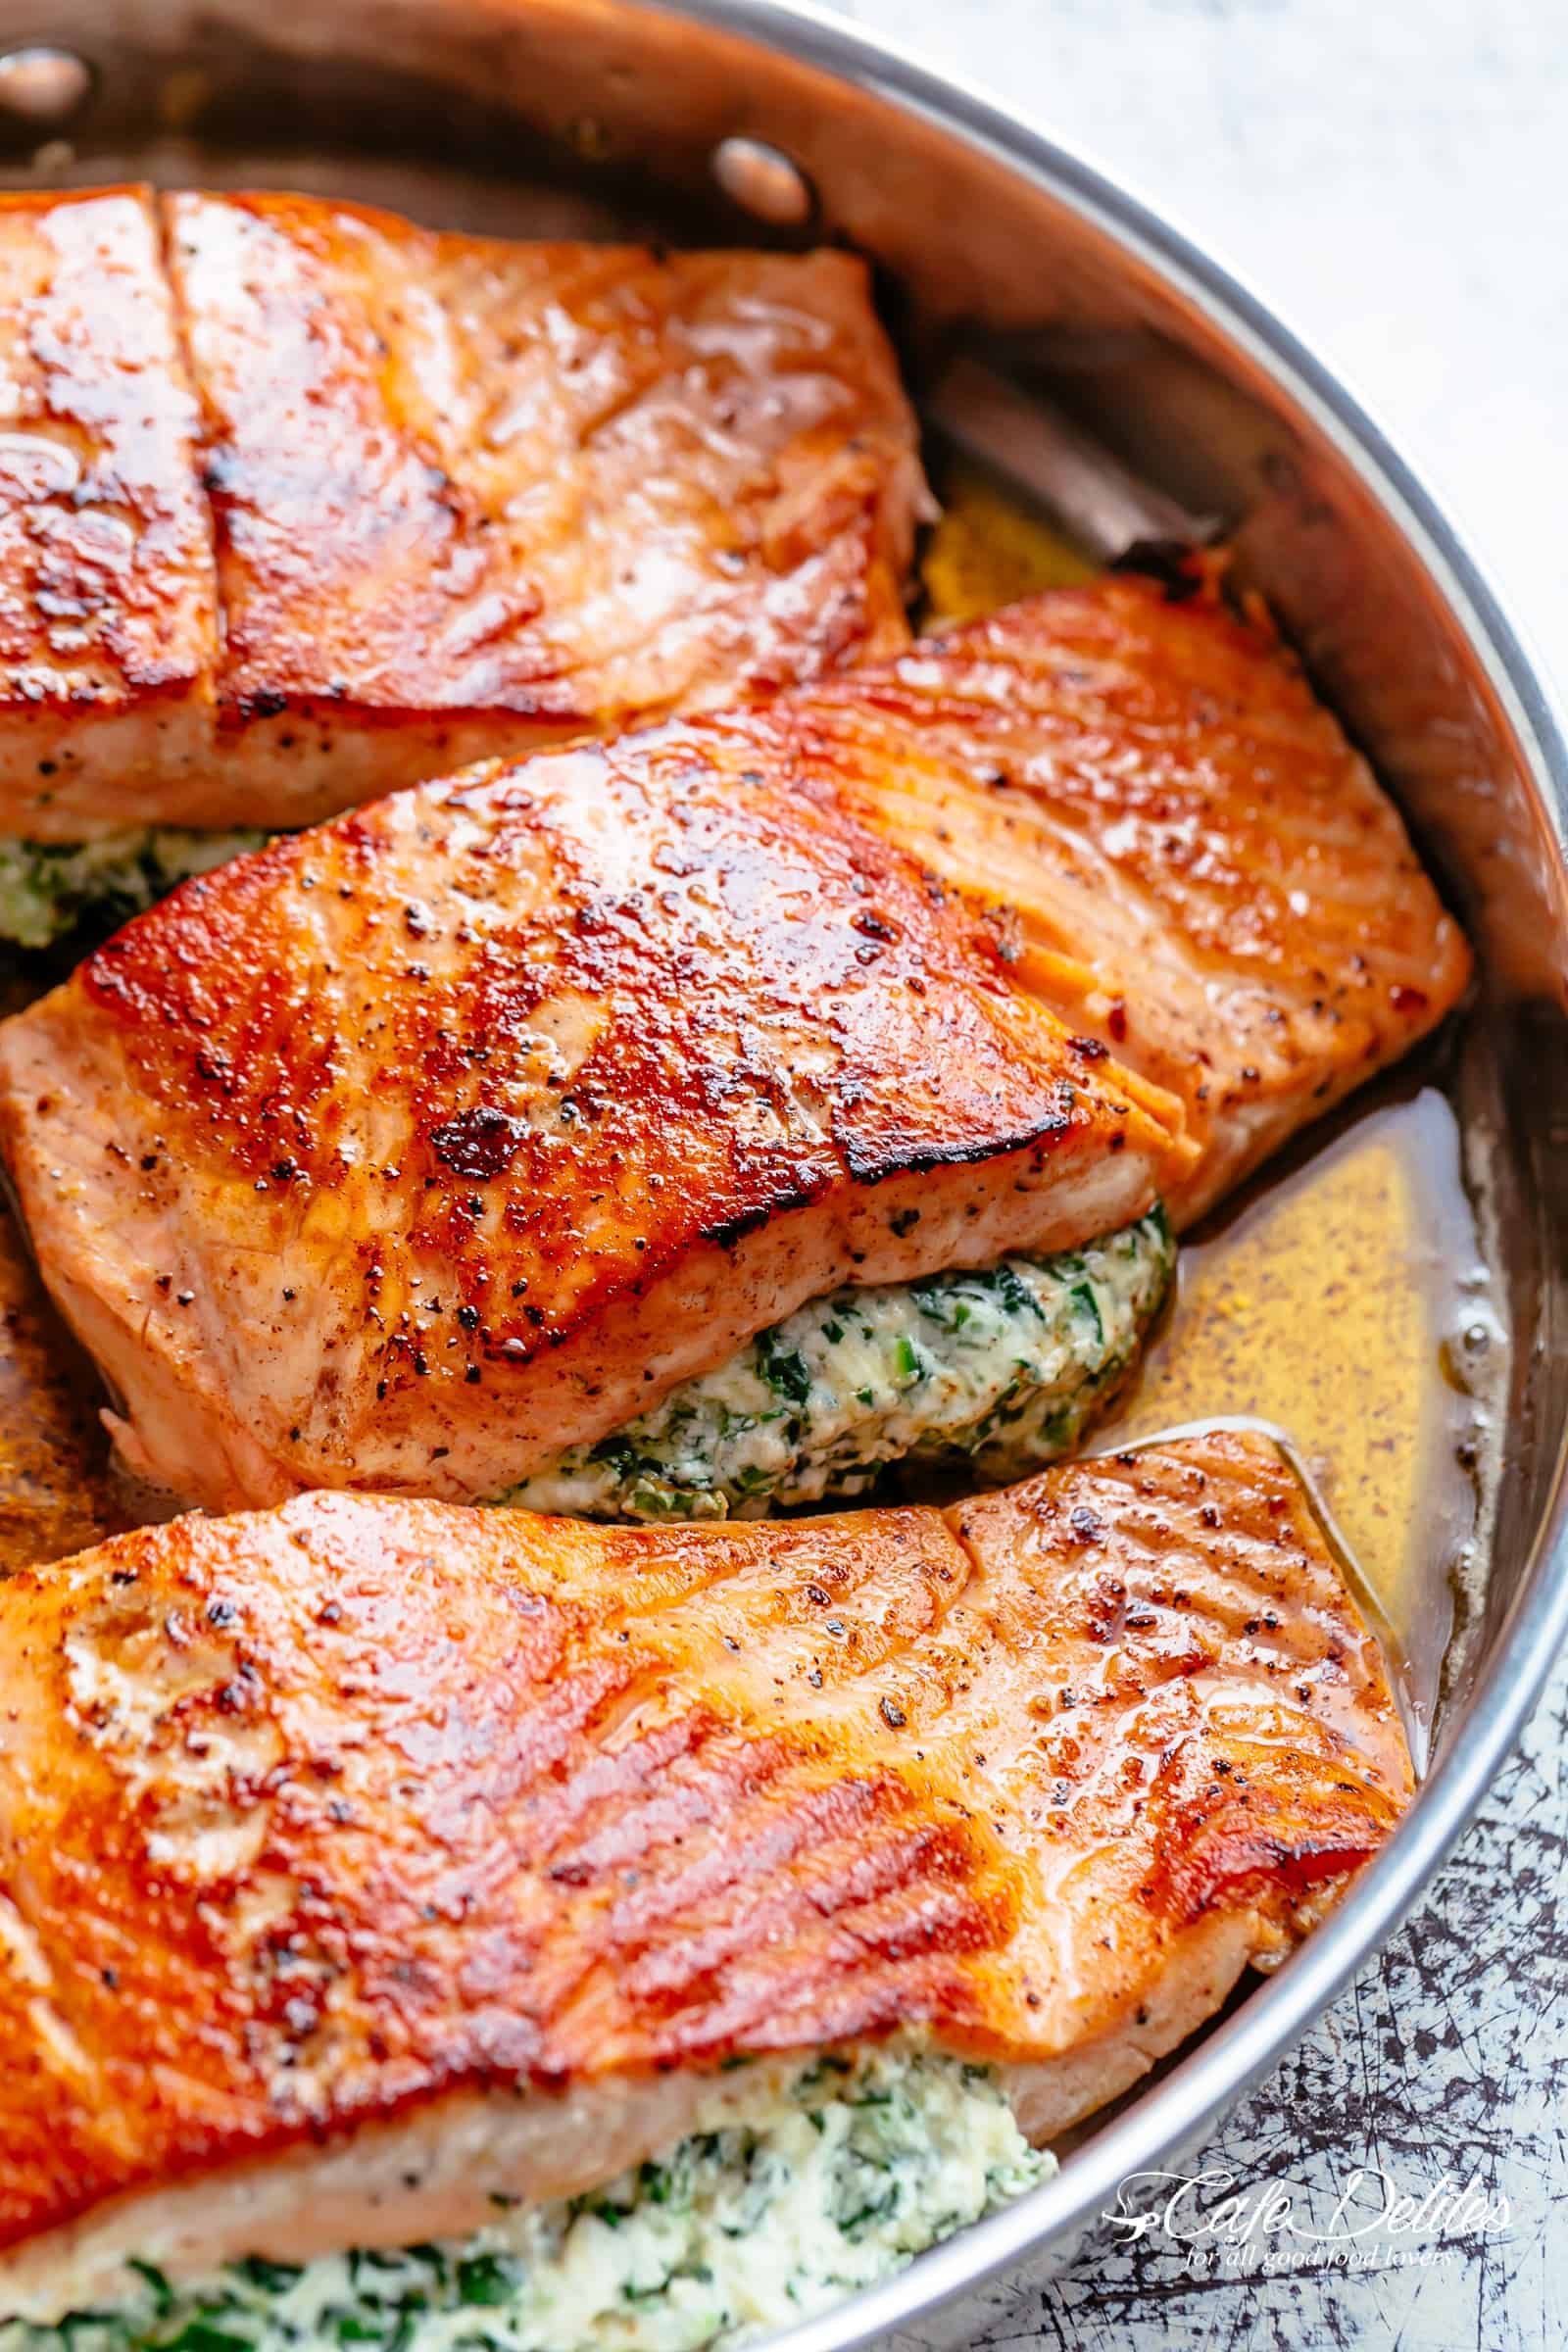 Creamy Spinach Stuffed Salmon in garlic butter is a new delicious way to enjoy salmon! Filled with cream cheese, spinach, parmesan cheese and garlic, this salmon beats than anything found in a restaurant. Your new favourite salmon recipe includes pan fried AND oven baked methods! | cafedelites.com